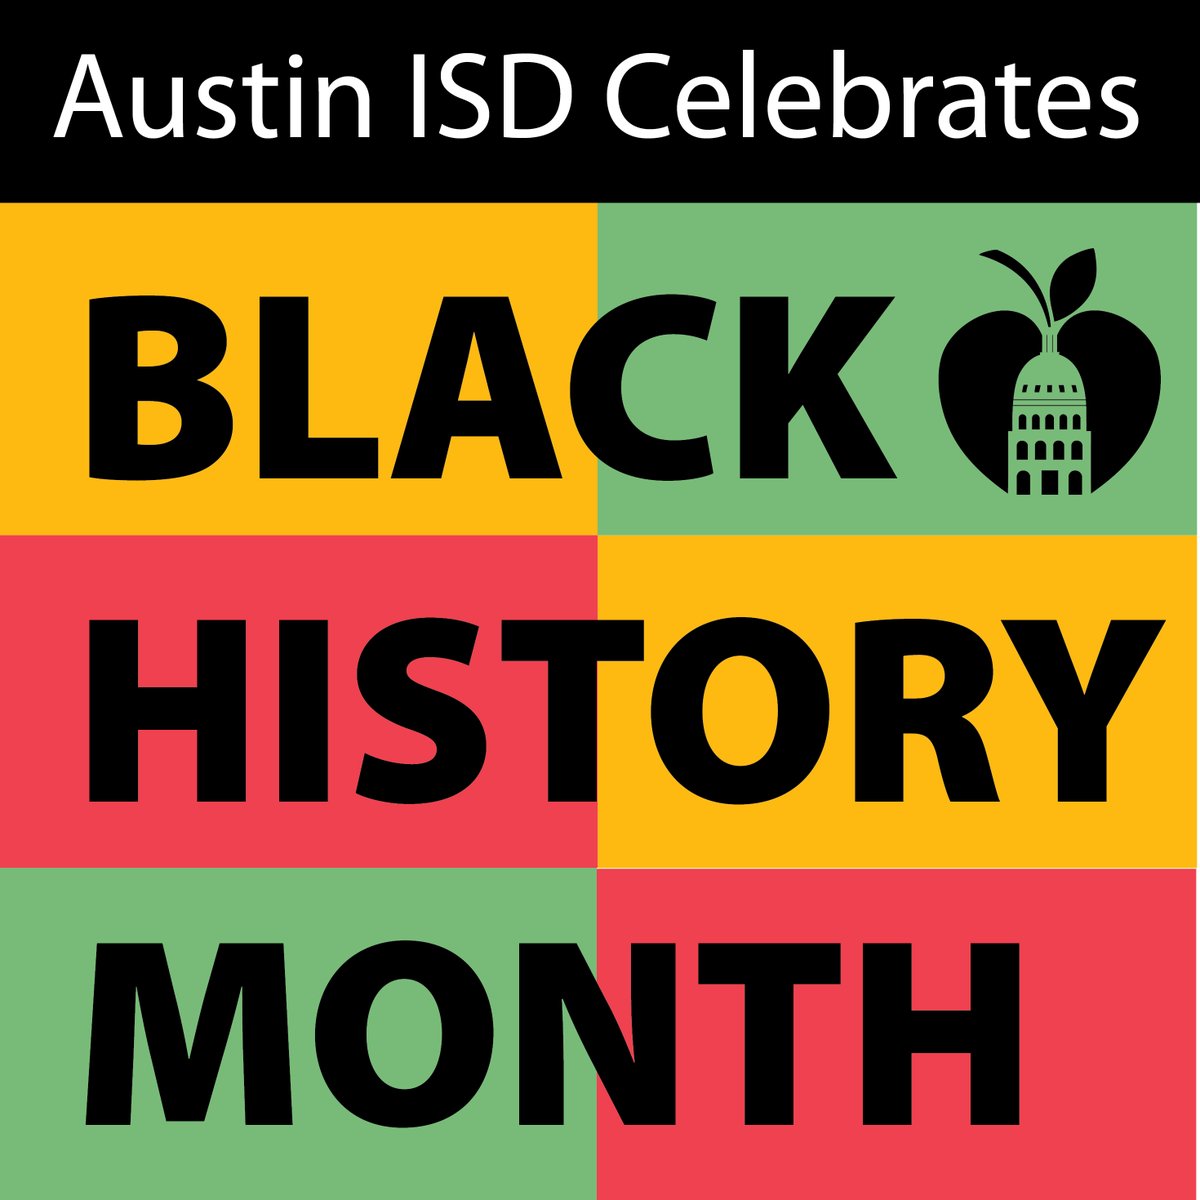 We are #AISDProud to celebrate Black History Month across Austin ISD. From lessons in the classroom to recognitions across Austin ISD we want to raise up and celebrate the history of Black Americans.